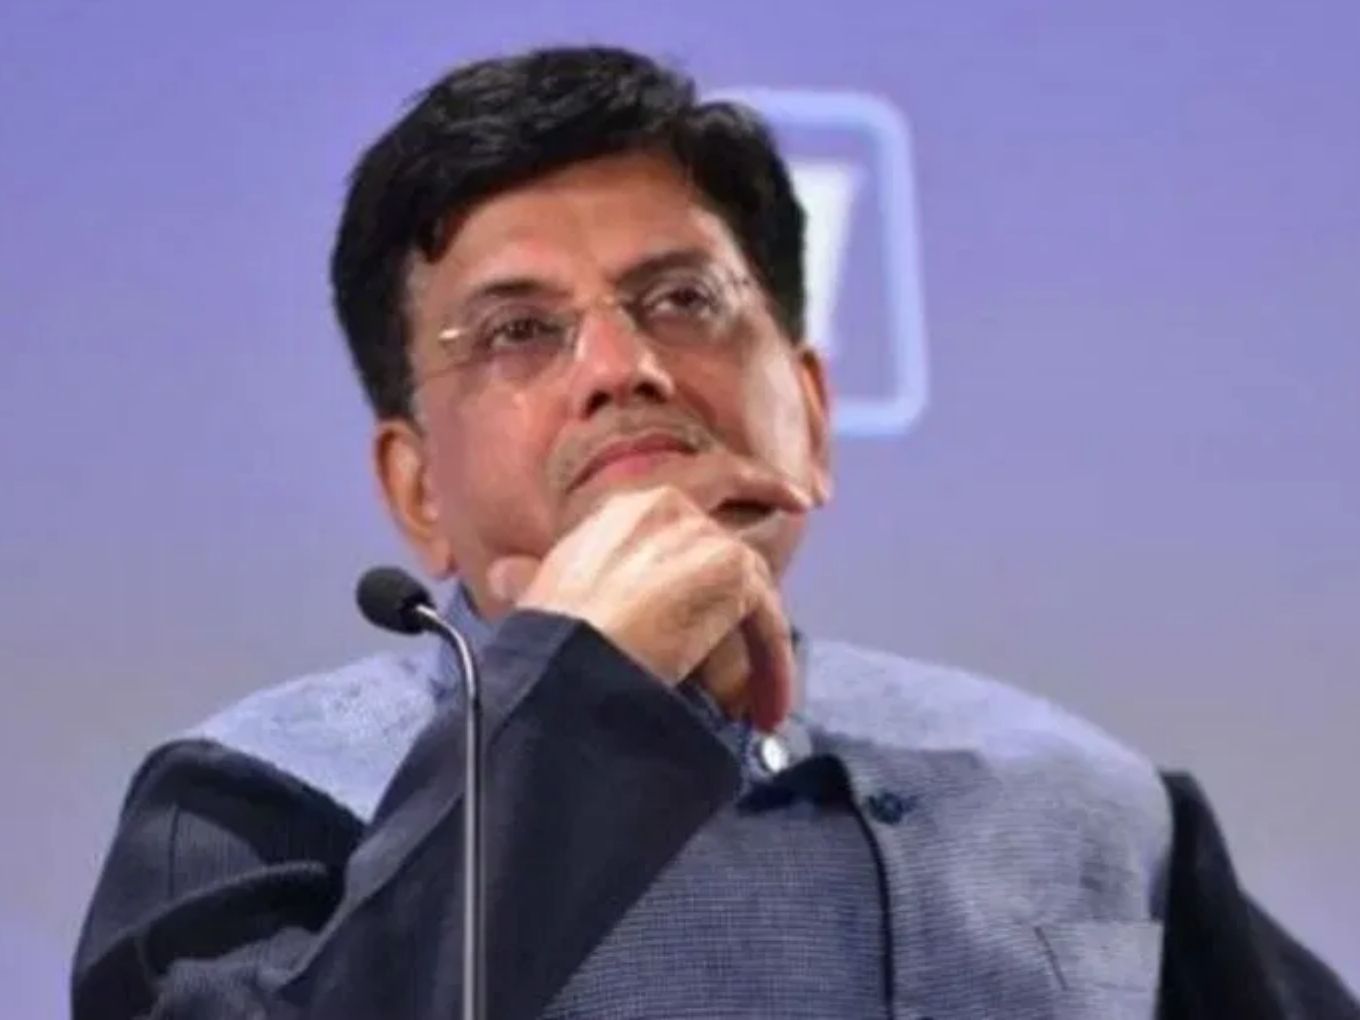 Govt Welcomes All Ethical Investments: Piyush Goyal To Amazon